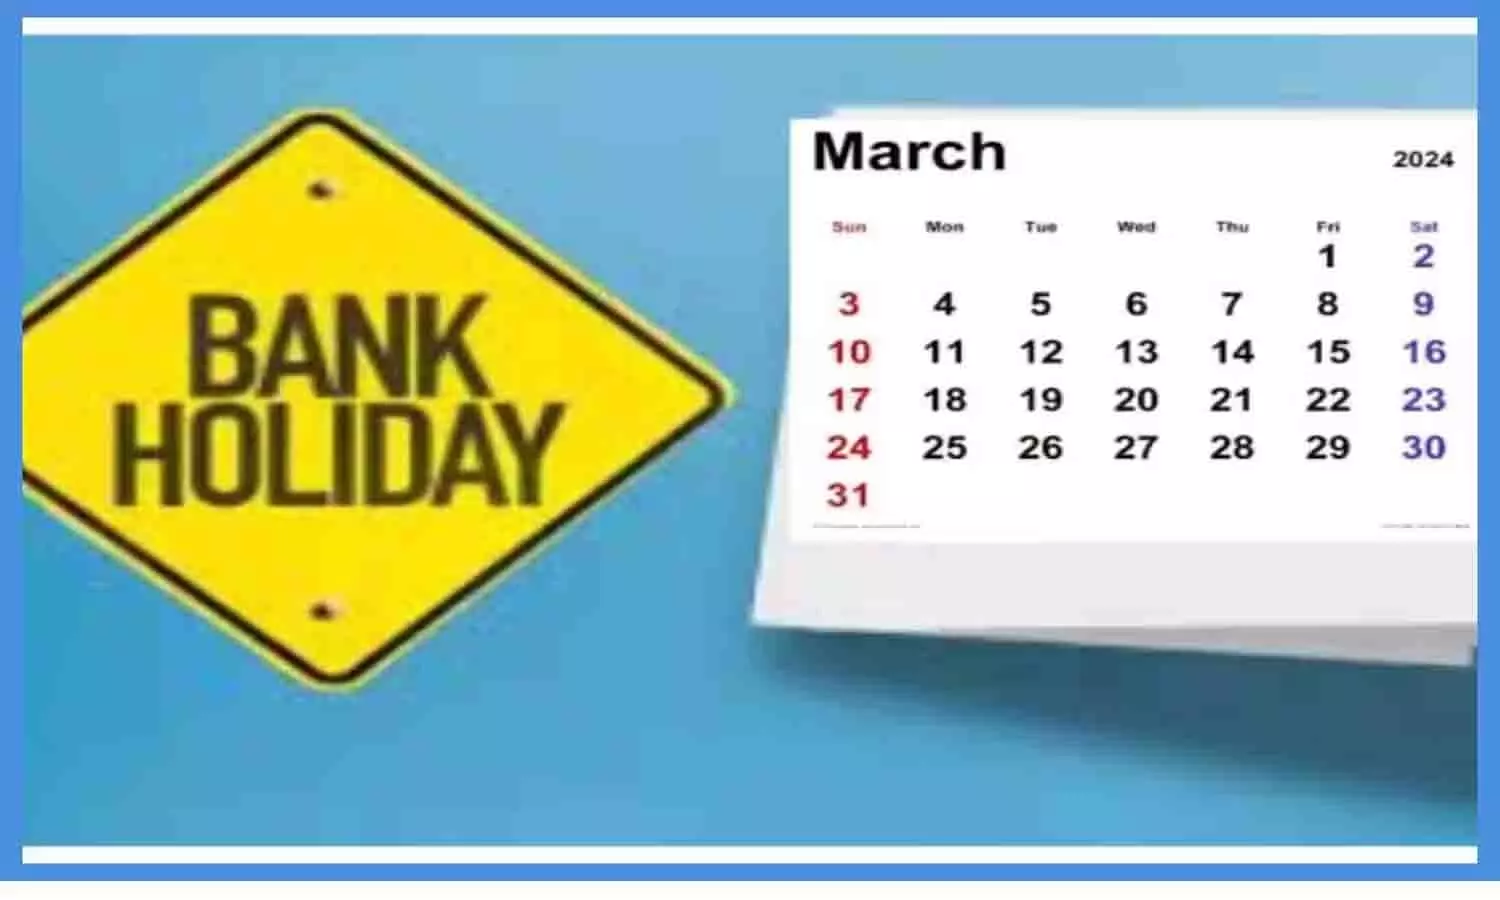 BANK HOLIDAY MARCH 2024